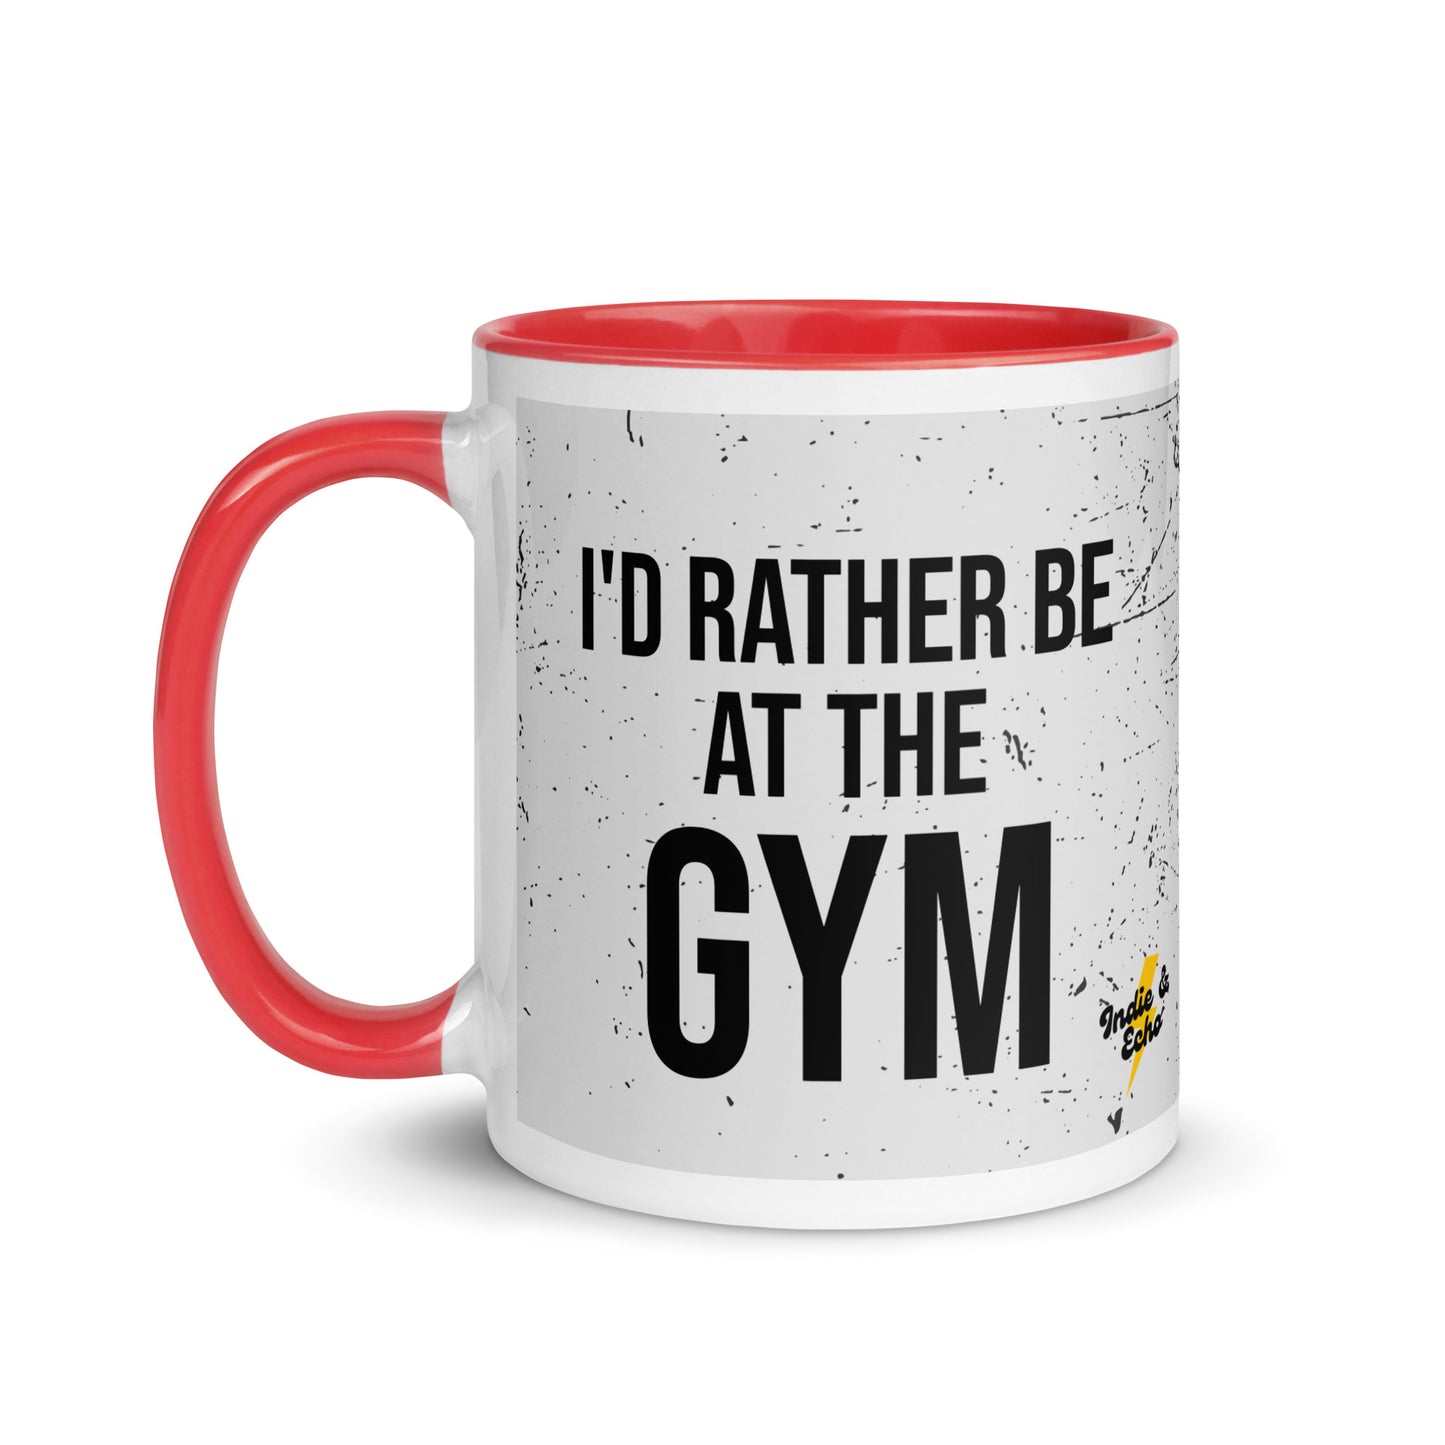 Red handled mug with I'd rather be at the gym written on it, across a grey splatter background. A gift for someone who loves the gym.